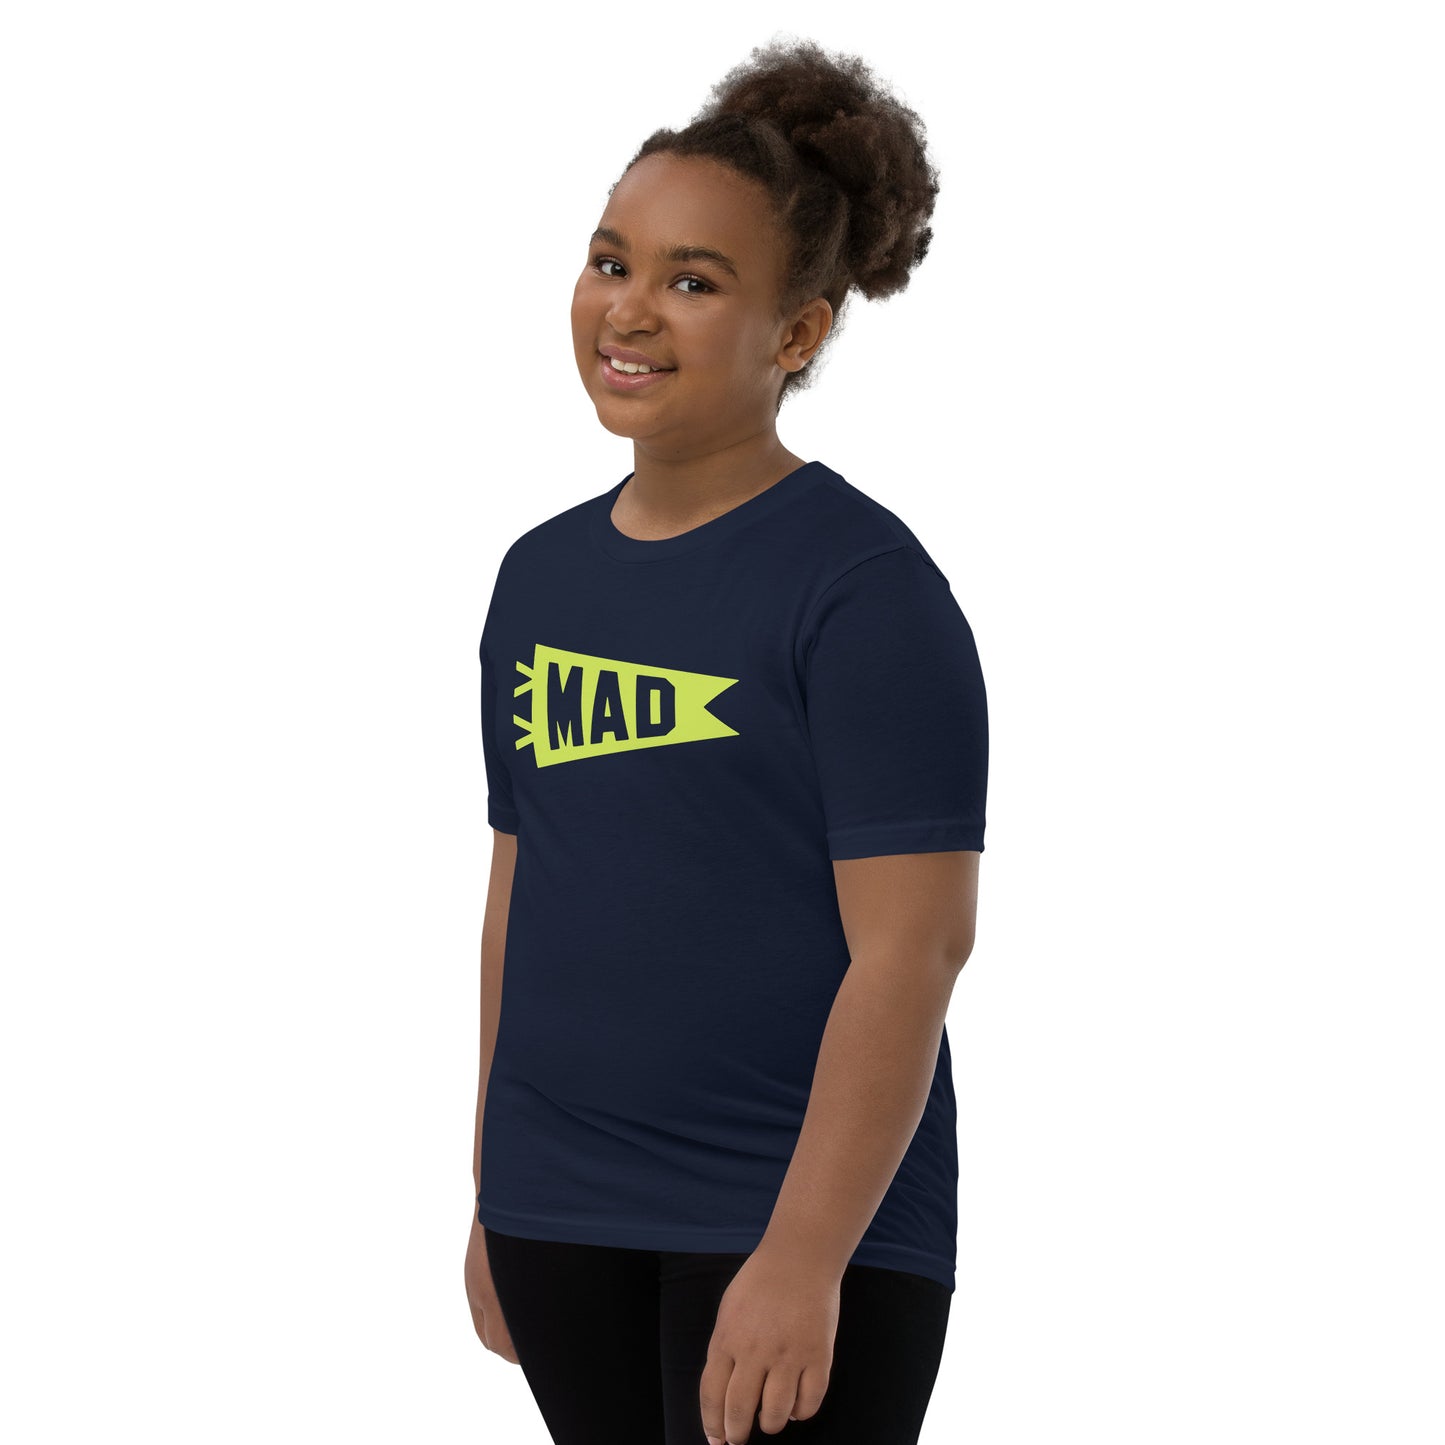 Kid's Airport Code Tee - Green Graphic • MAD Madrid • YHM Designs - Image 04